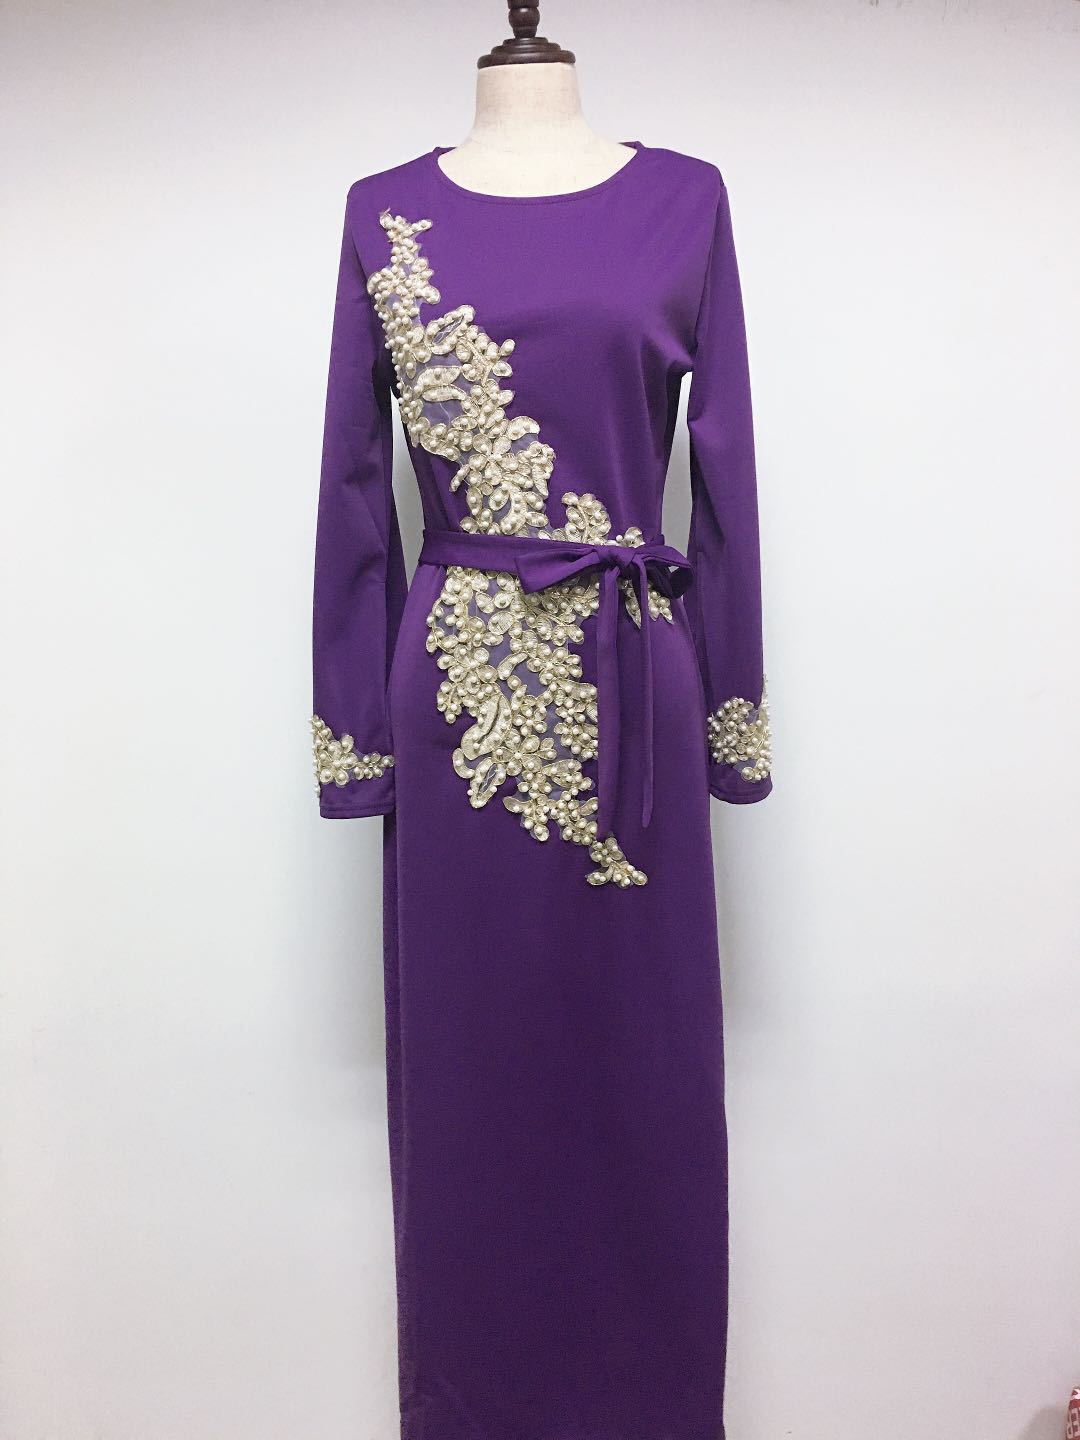 Factory direct supply Yiduoduo new fashion and elegant embroidery dress lace beaded trumpet sleeve lace-up dress 1921